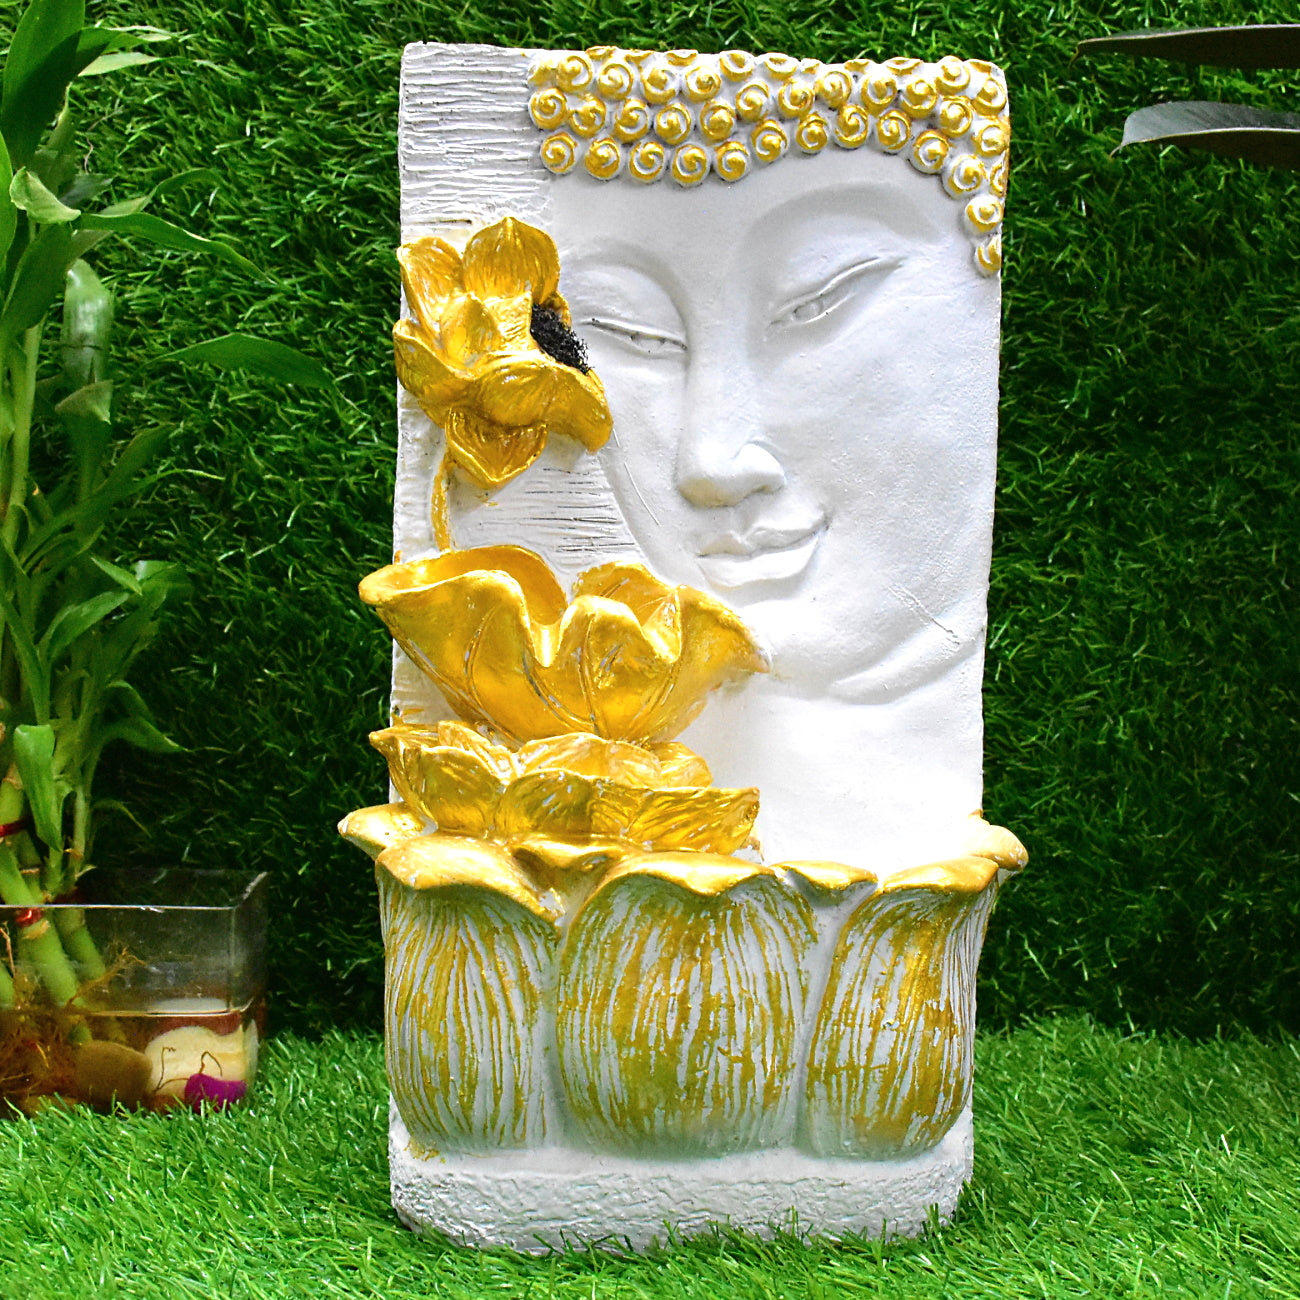 Buddha Face with Lotus Wall and Table Water Fountain : 37 CM, Golden-White